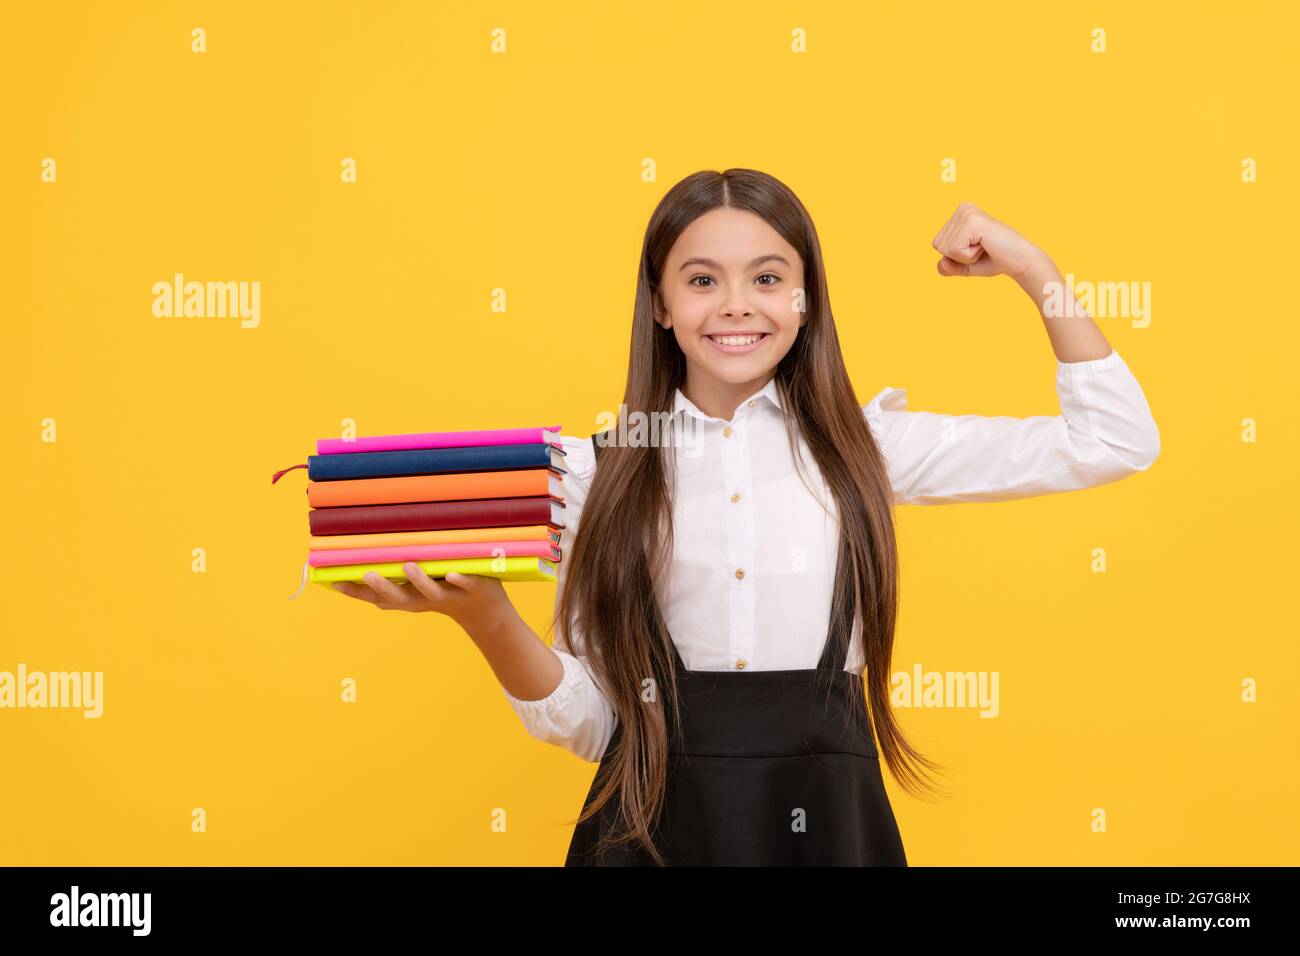 educational childrens literature. successful intellectual child. pass exams perfectly. Stock Photo